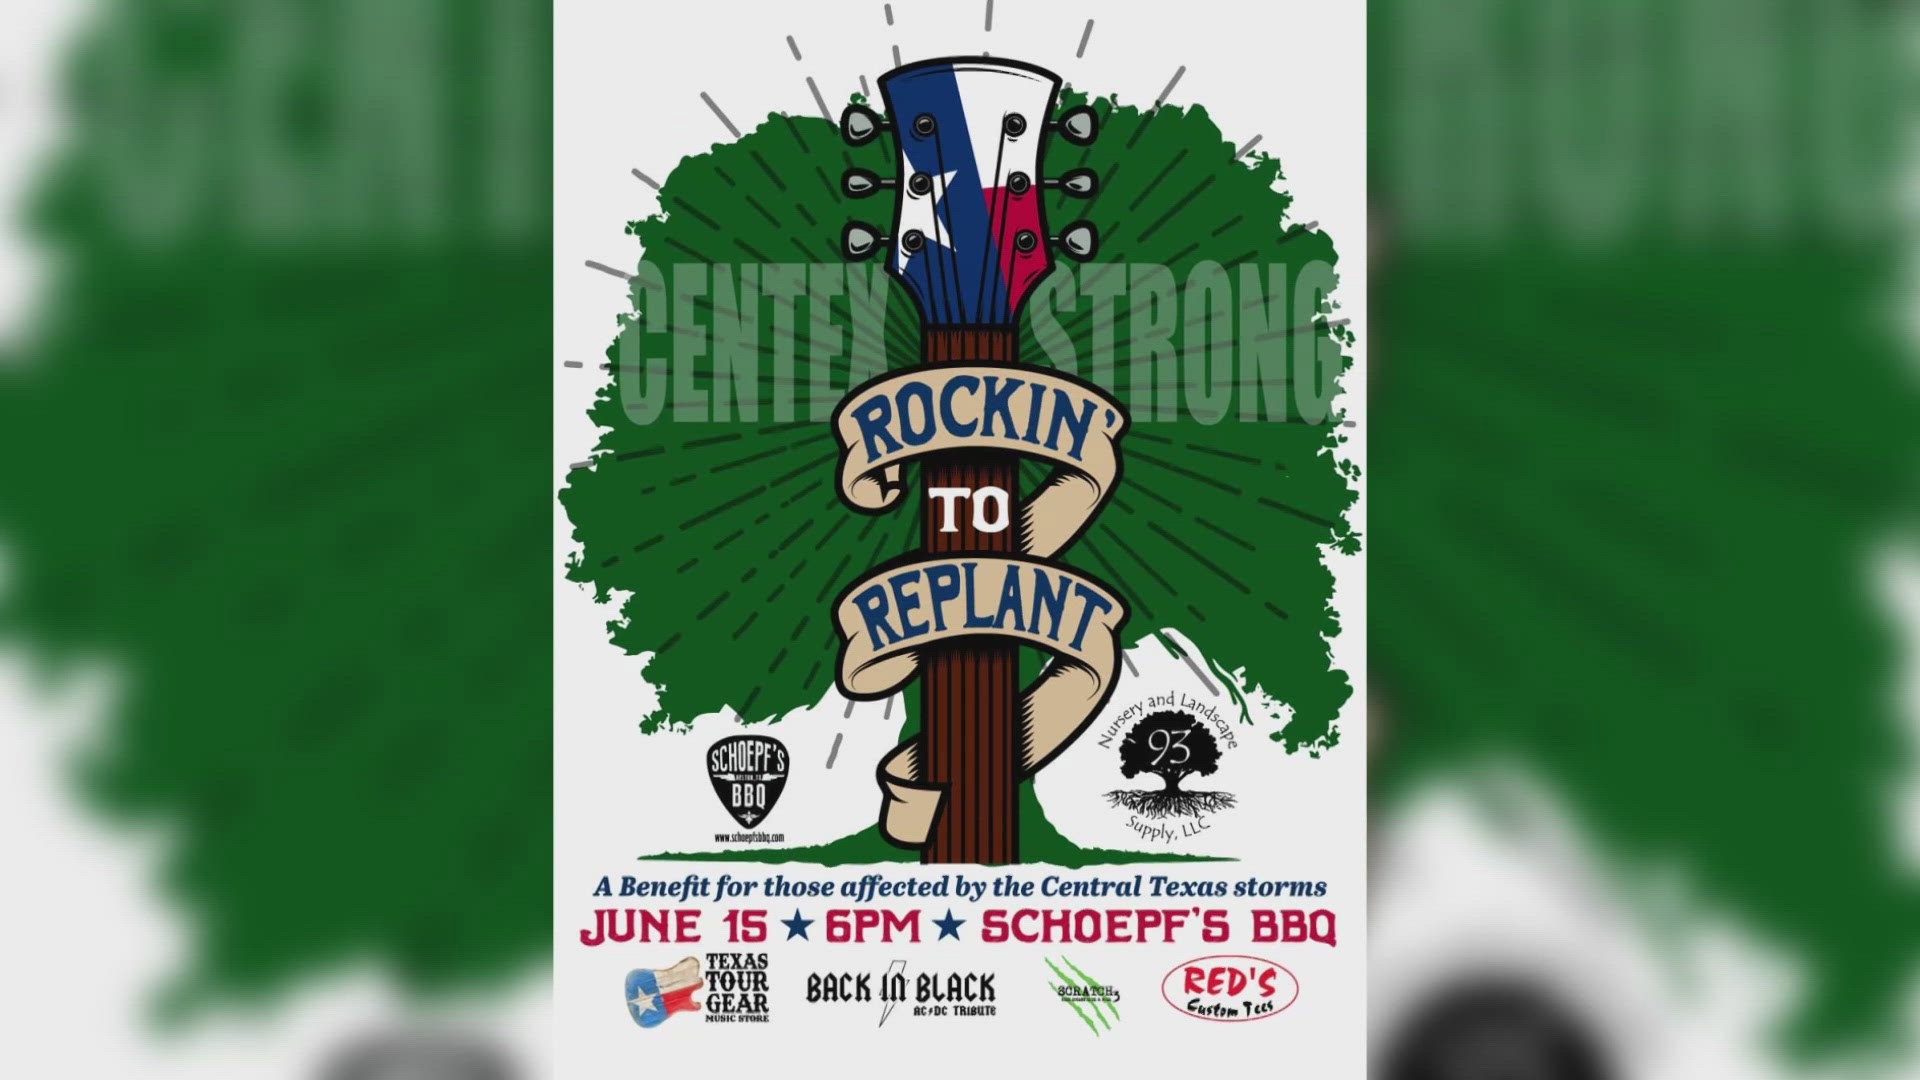 Schoepf's BBQ will host the concert on June 15 to raise money to replant trees in Central Texas.